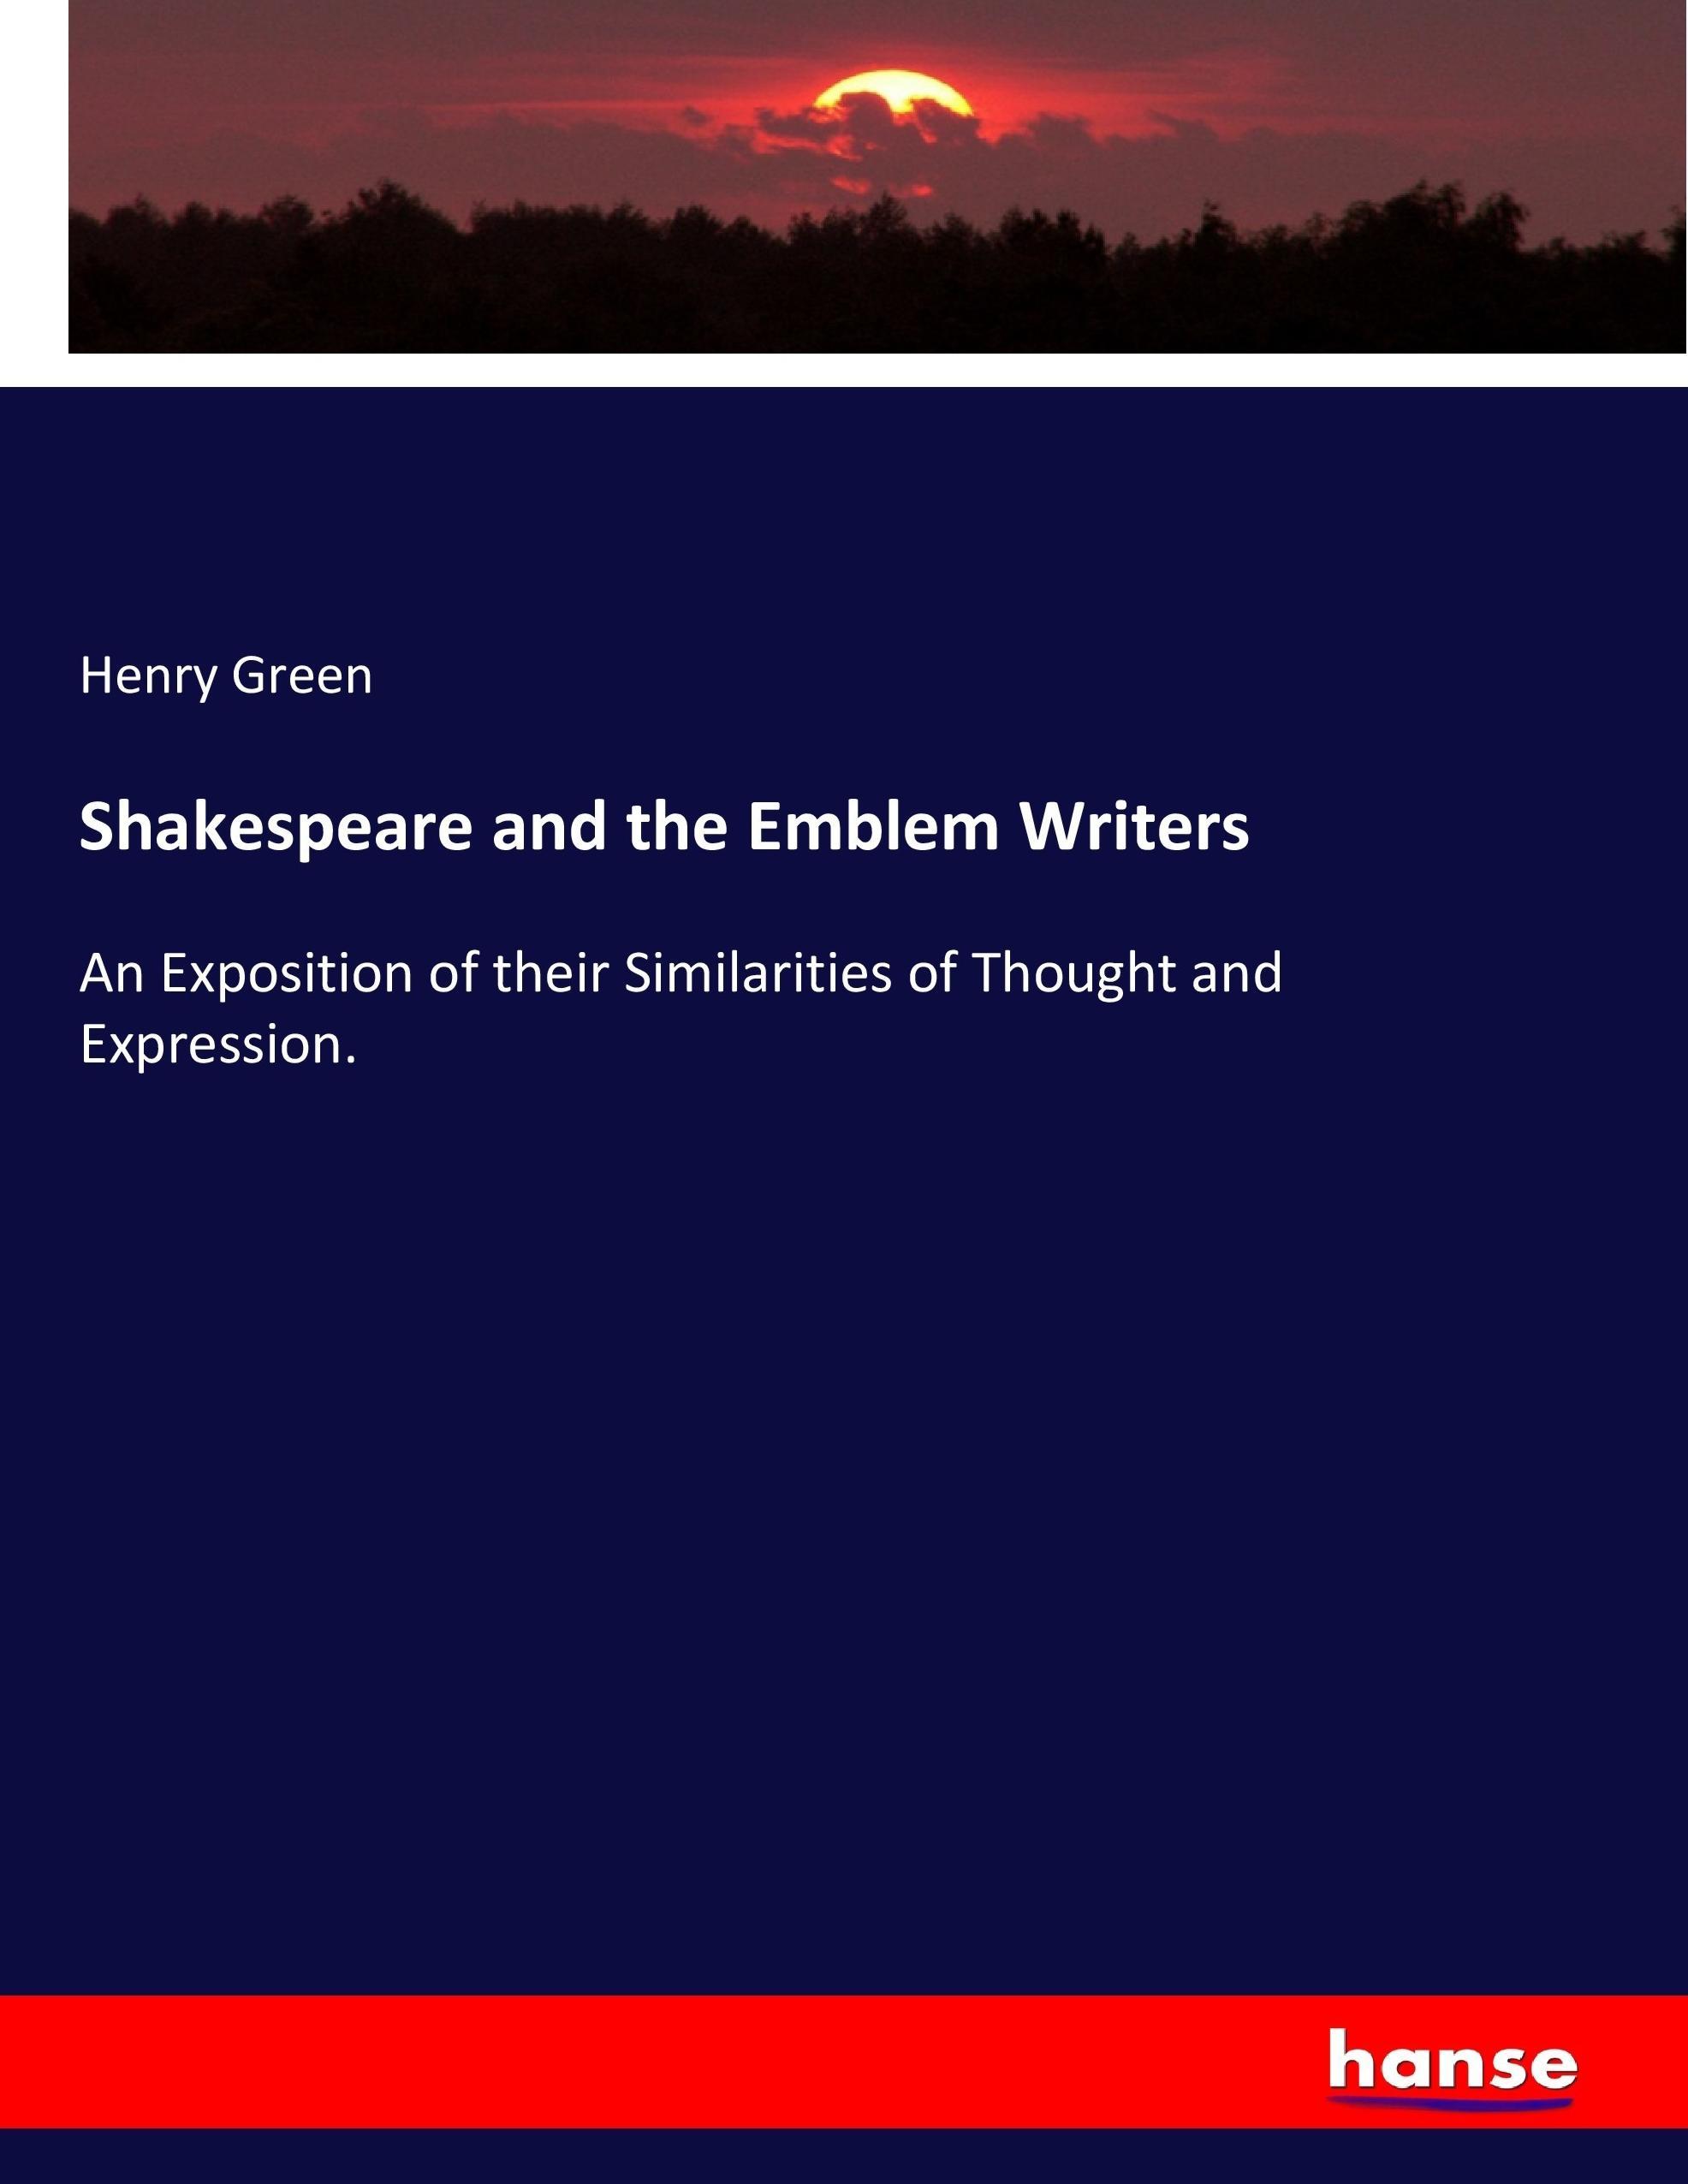 Shakespeare and the Emblem Writers / An Exposition of their Similarities of Thought and Expression. / Henry Green / Taschenbuch / Paperback / 628 S. / Englisch / 2017 / hansebooks / EAN 9783337060695 - Green, Henry